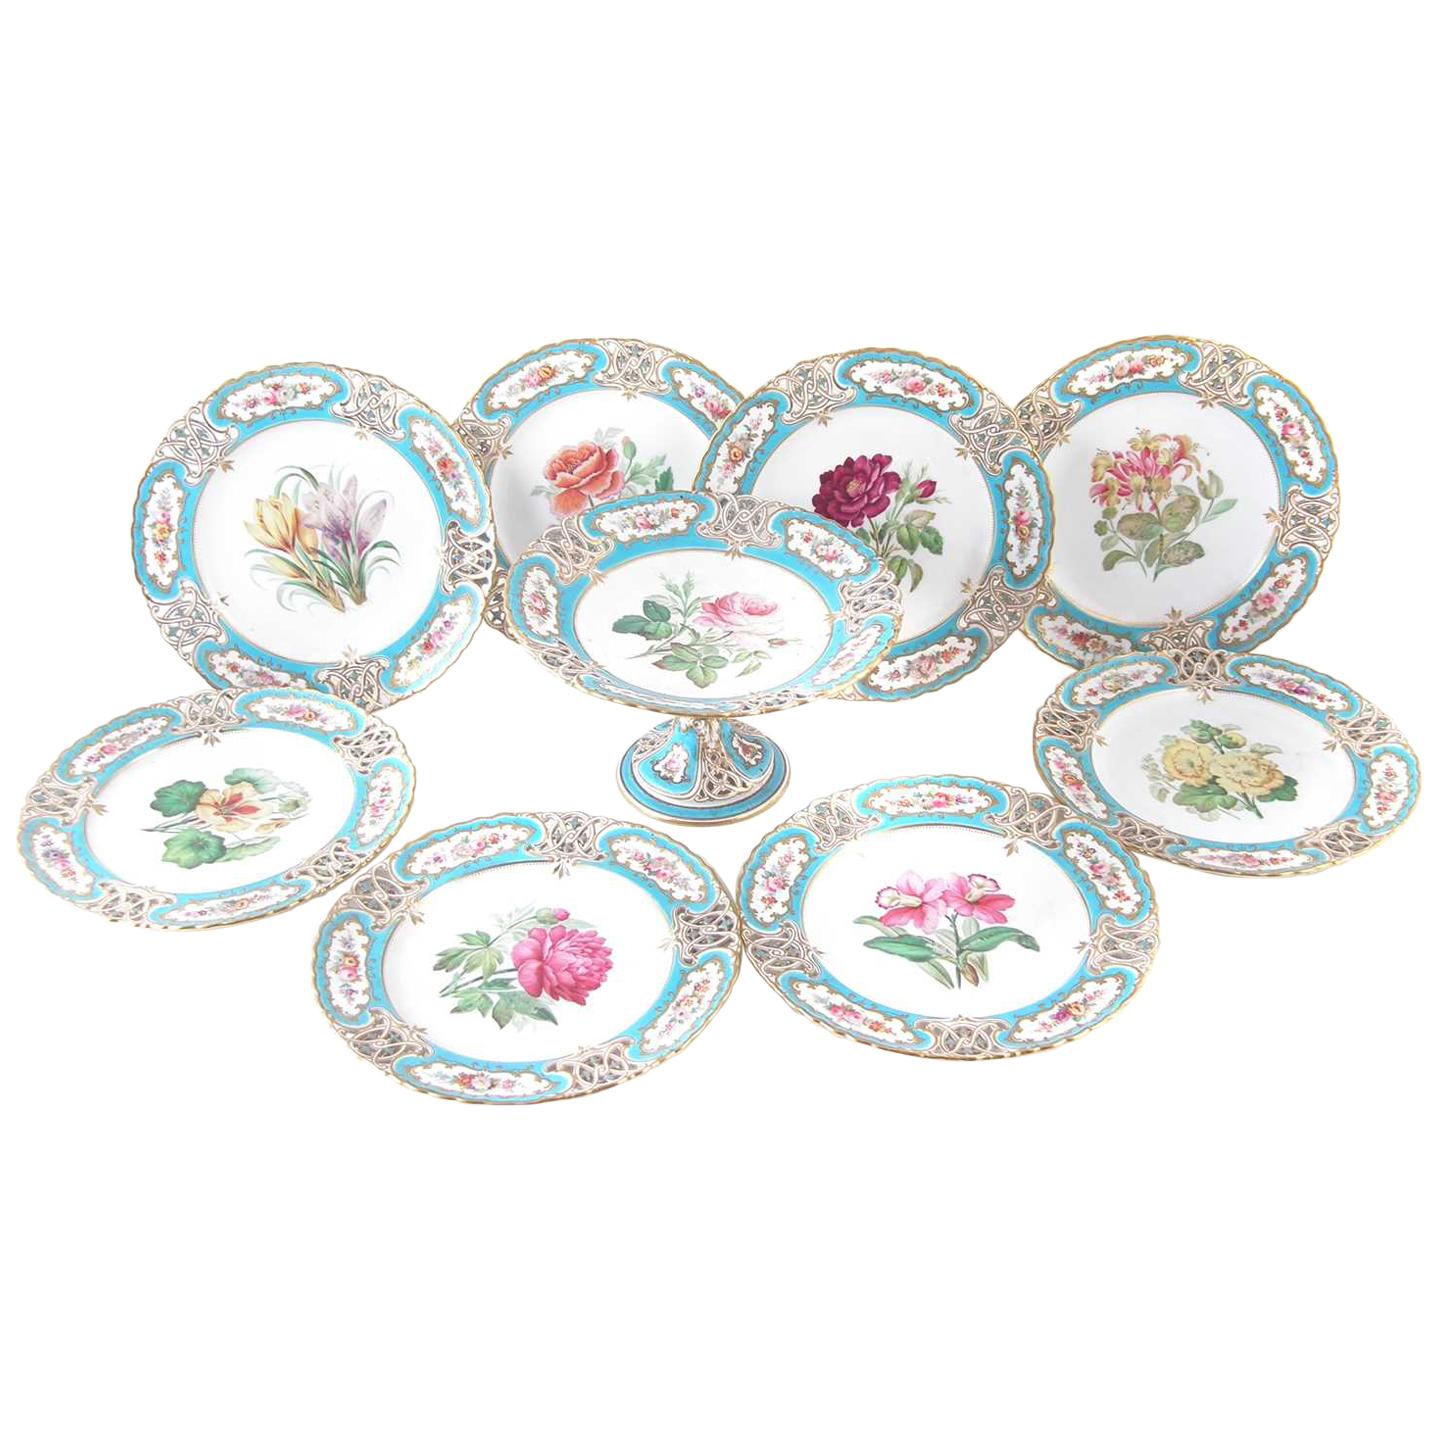 English Minton Reticulated Royal Arms Botanical Turquoise Dessert Service For Sale